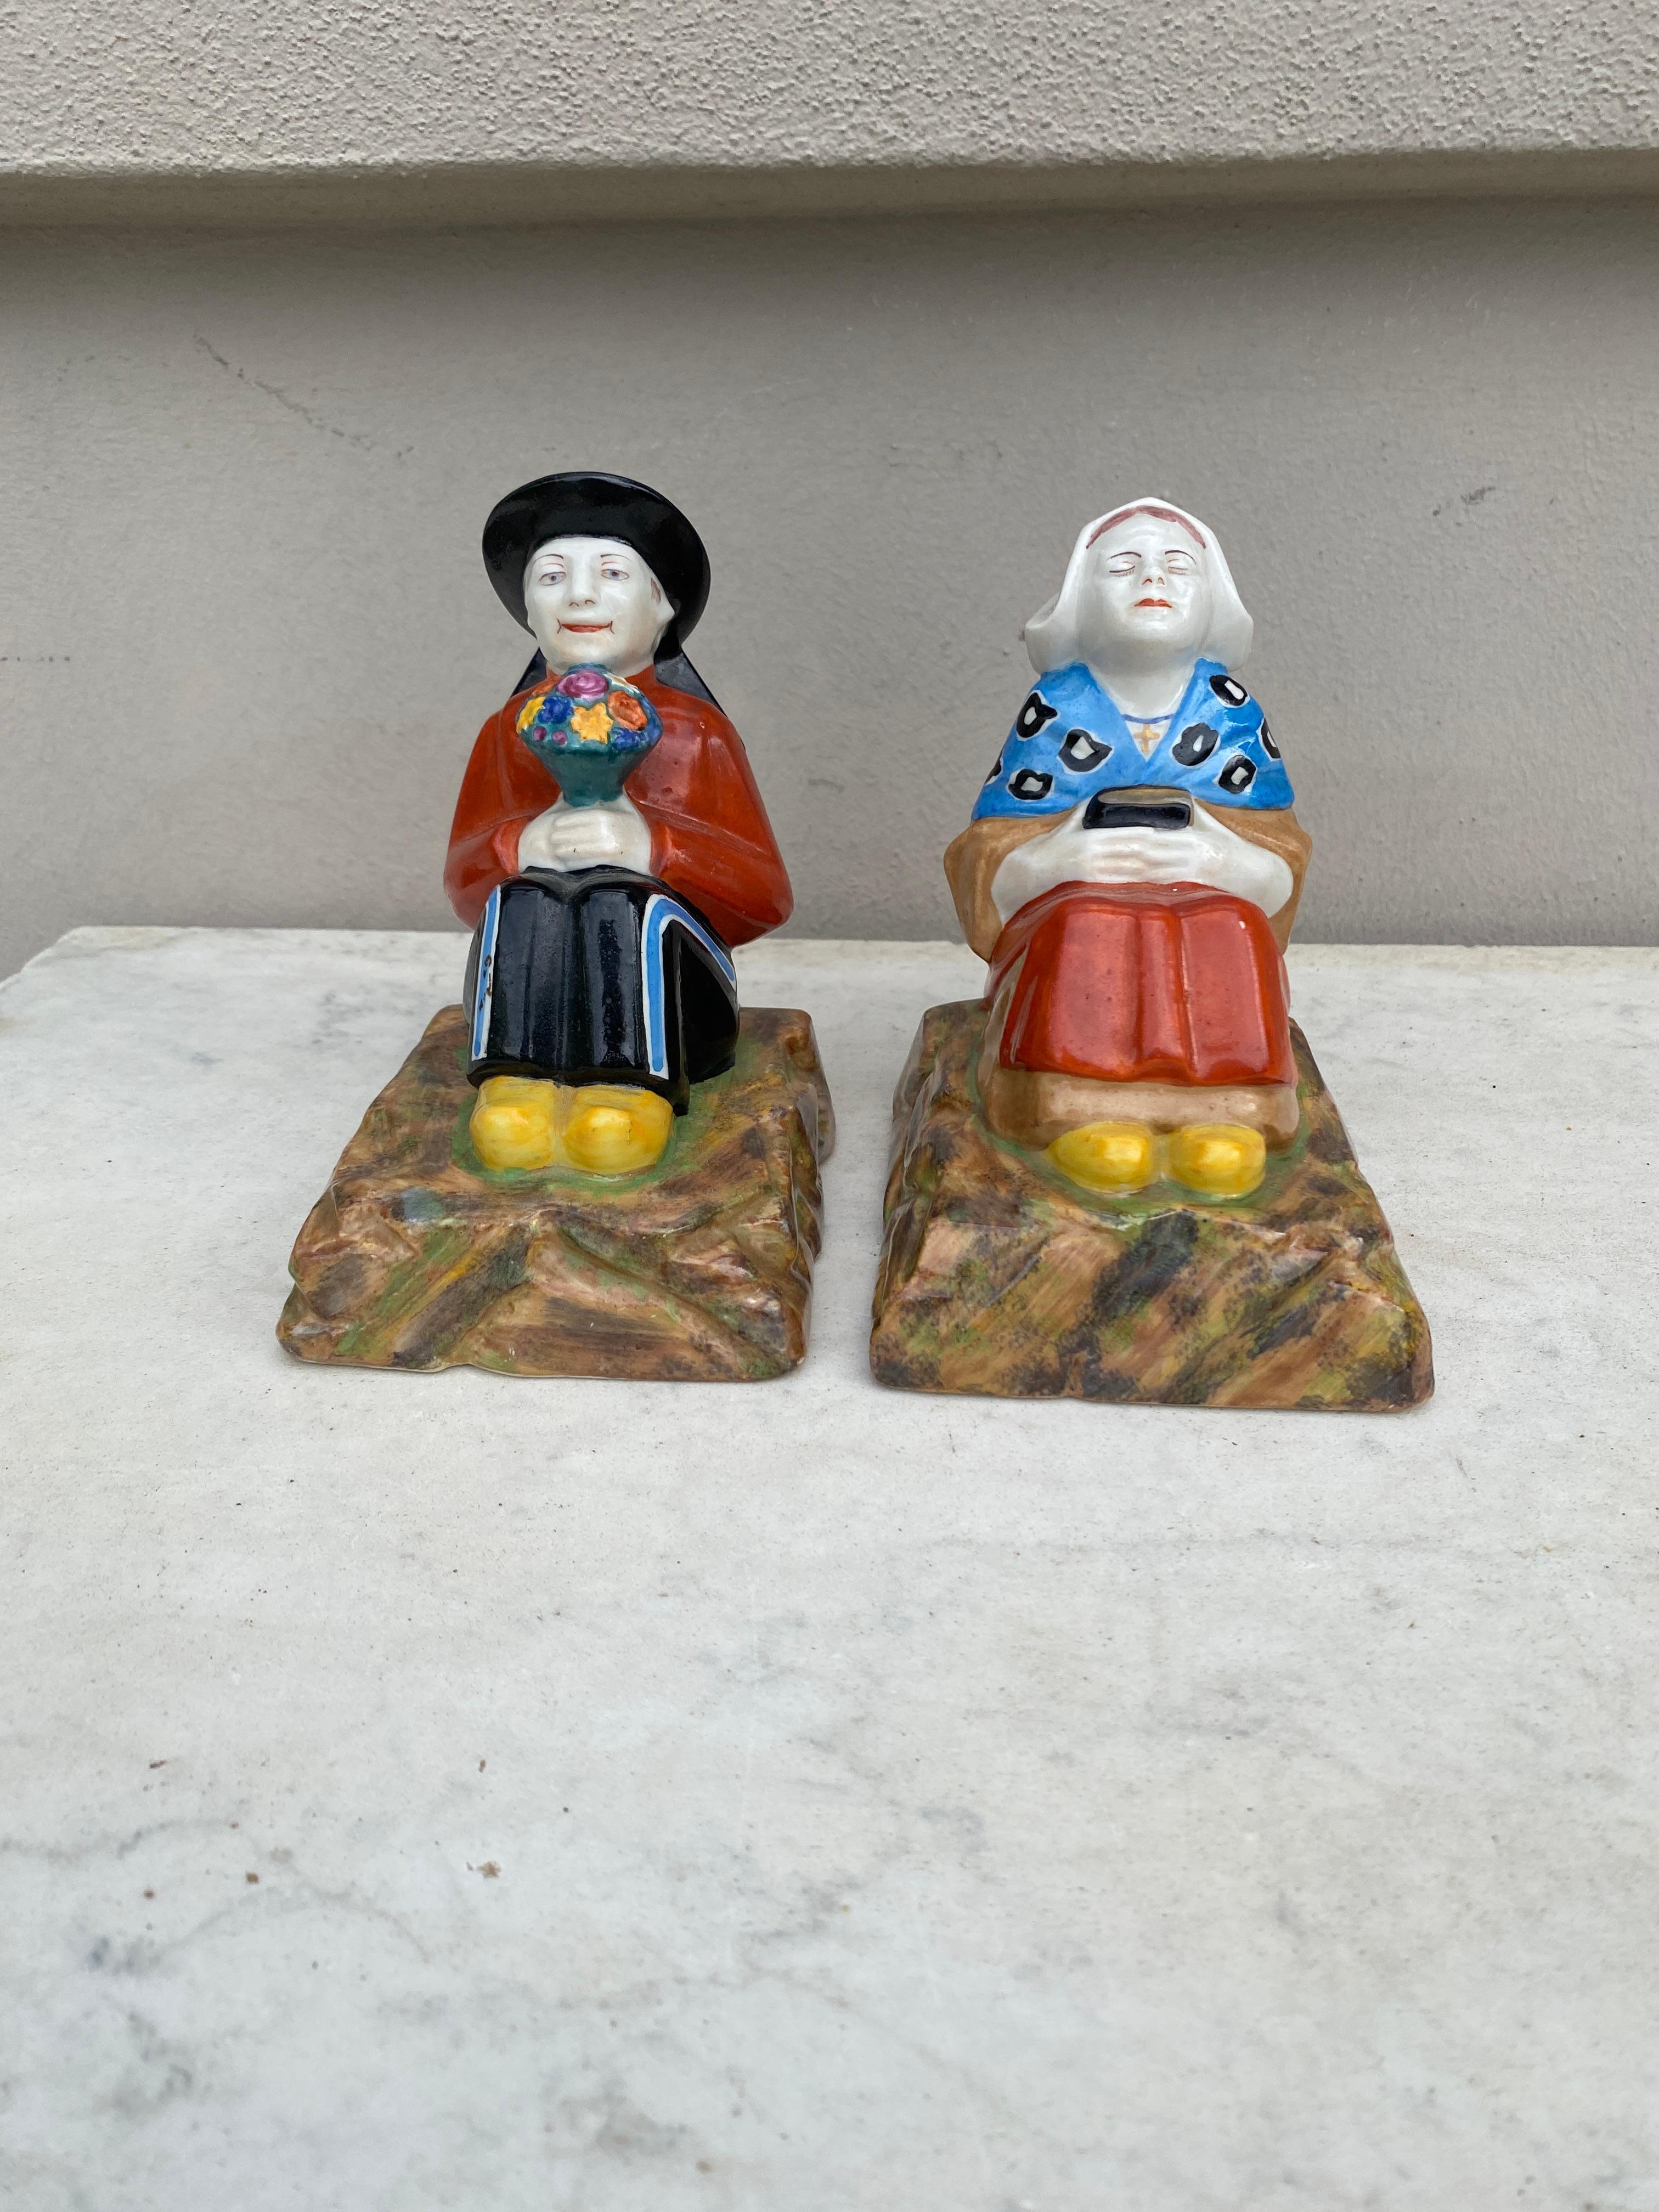 Pair of French Faience Bookends signed Desvres, circa 1930.
Represent 2 bretons.